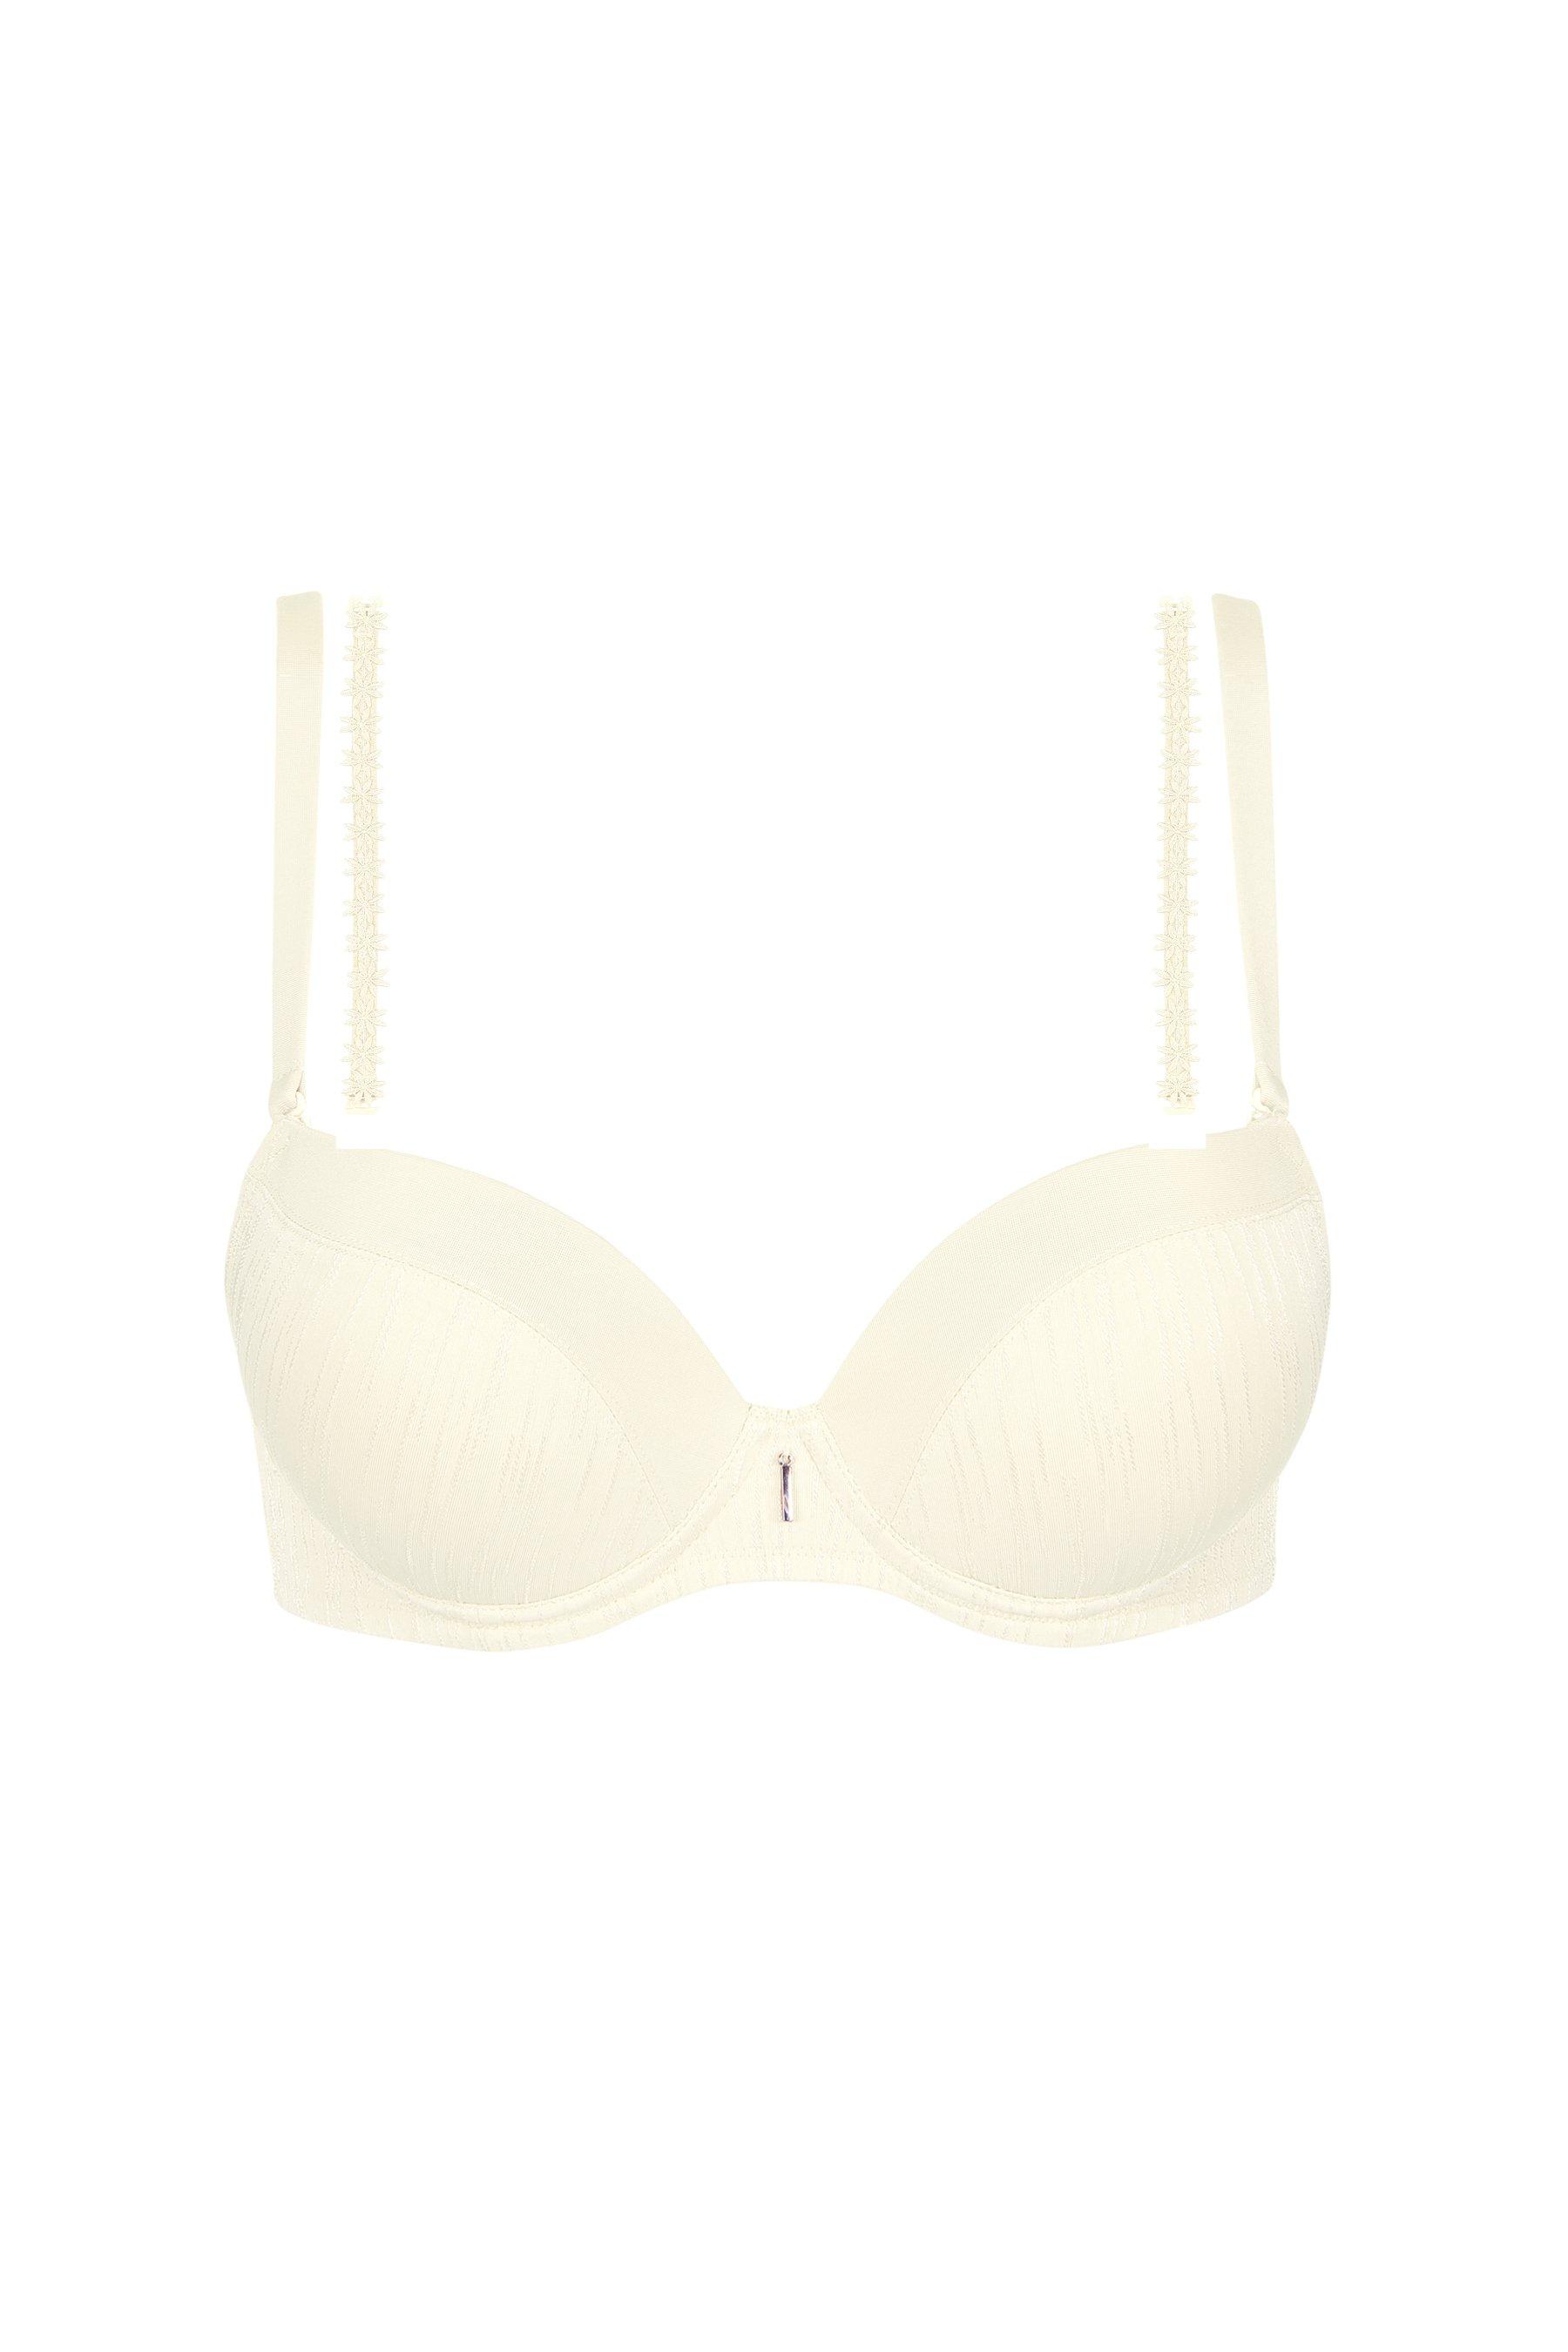 Shop M&Co Non Wired Bras up to 70% Off